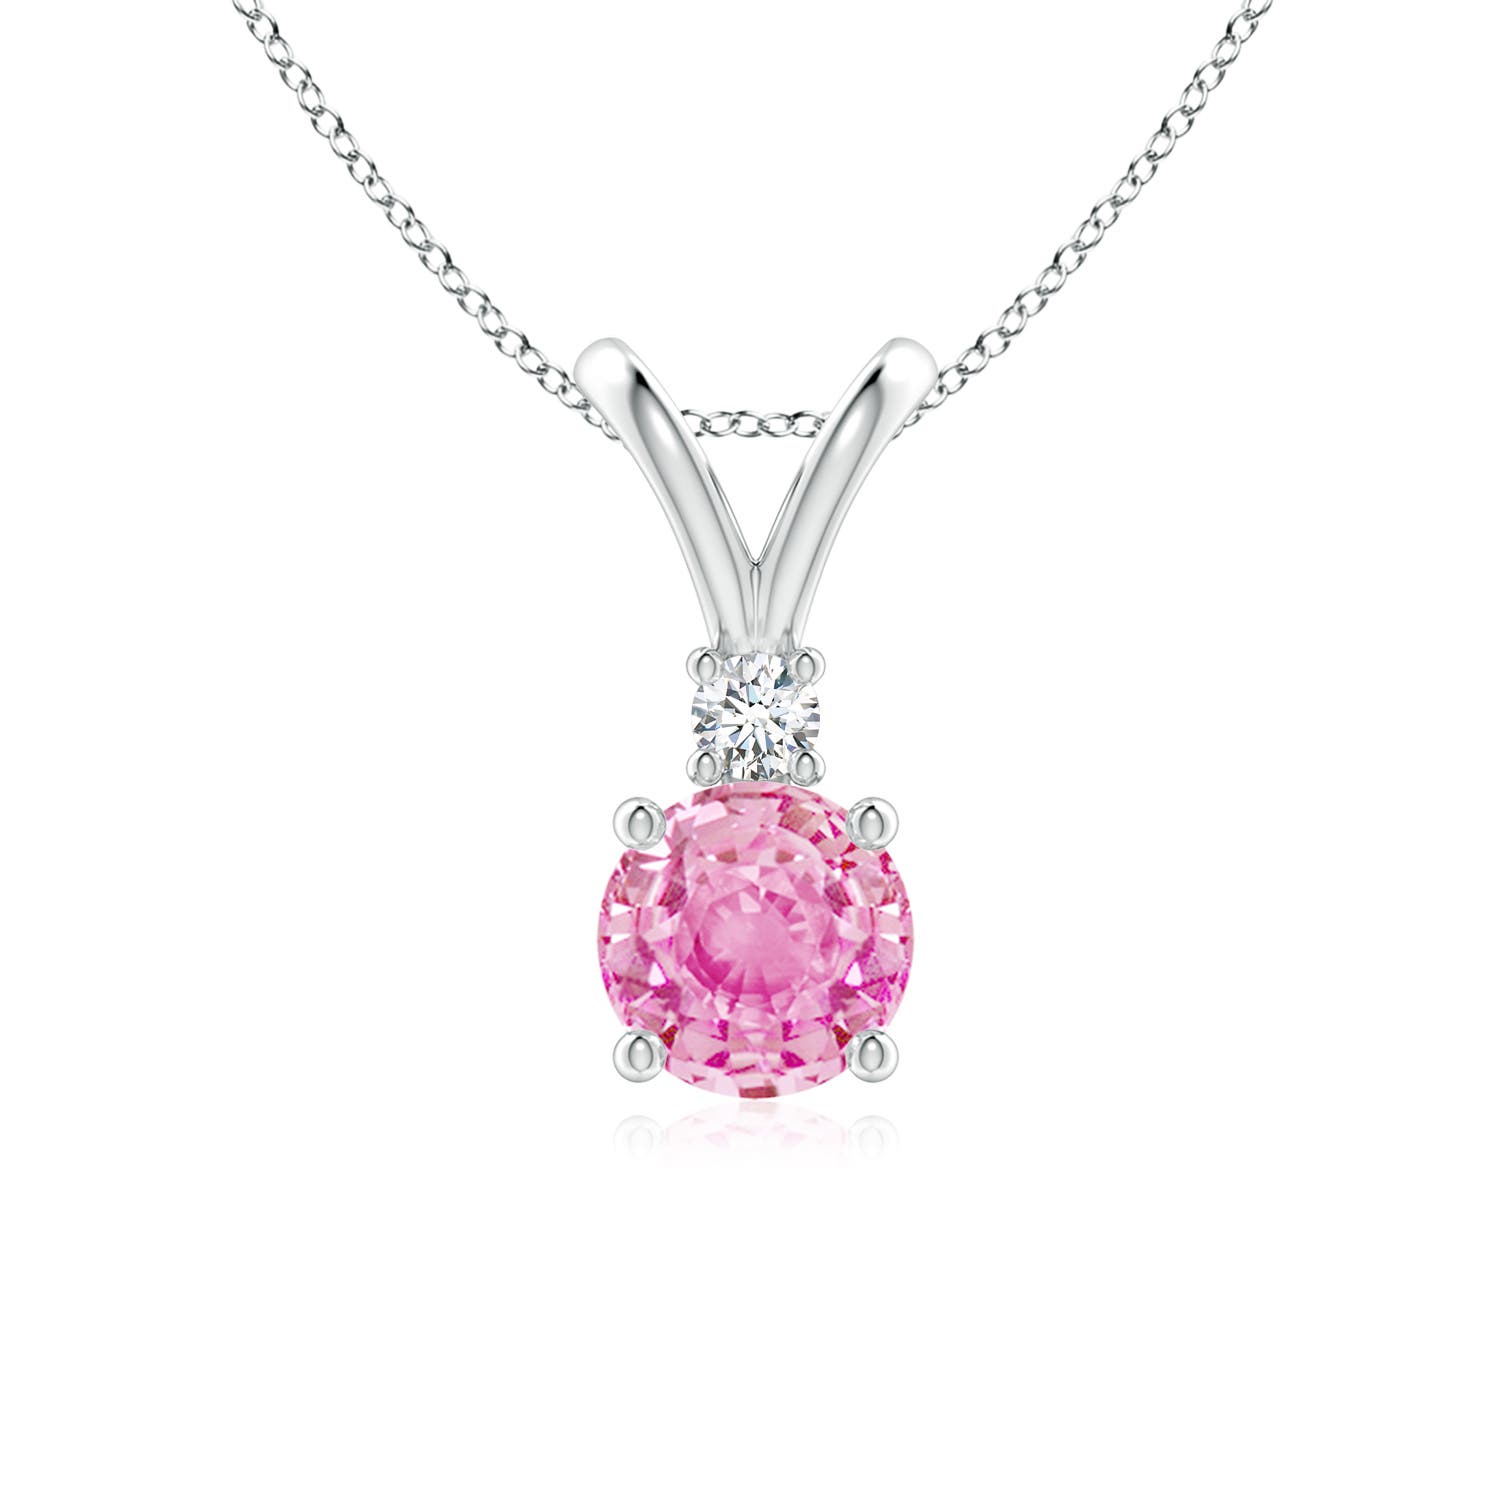 A - Pink Sapphire / 1.04 CT / 14 KT White Gold